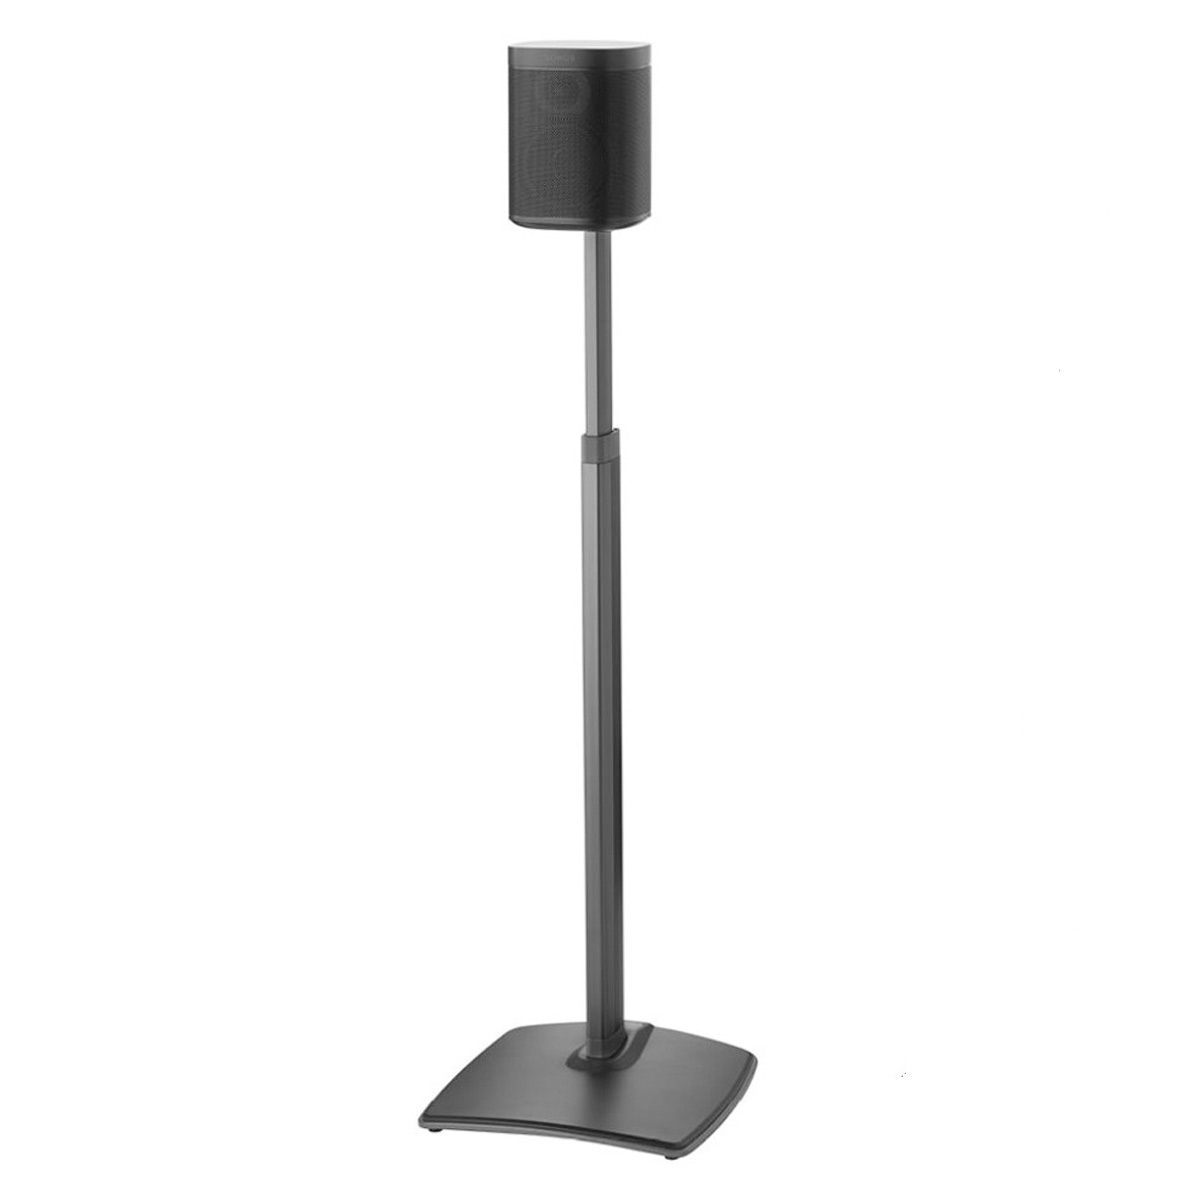 Sanus WSSA2 Adjustable Height Wireless Speaker Stands for Sonos ONE, PLAY:1, and PLAY:3 - Pair (Black) - image 2 of 4